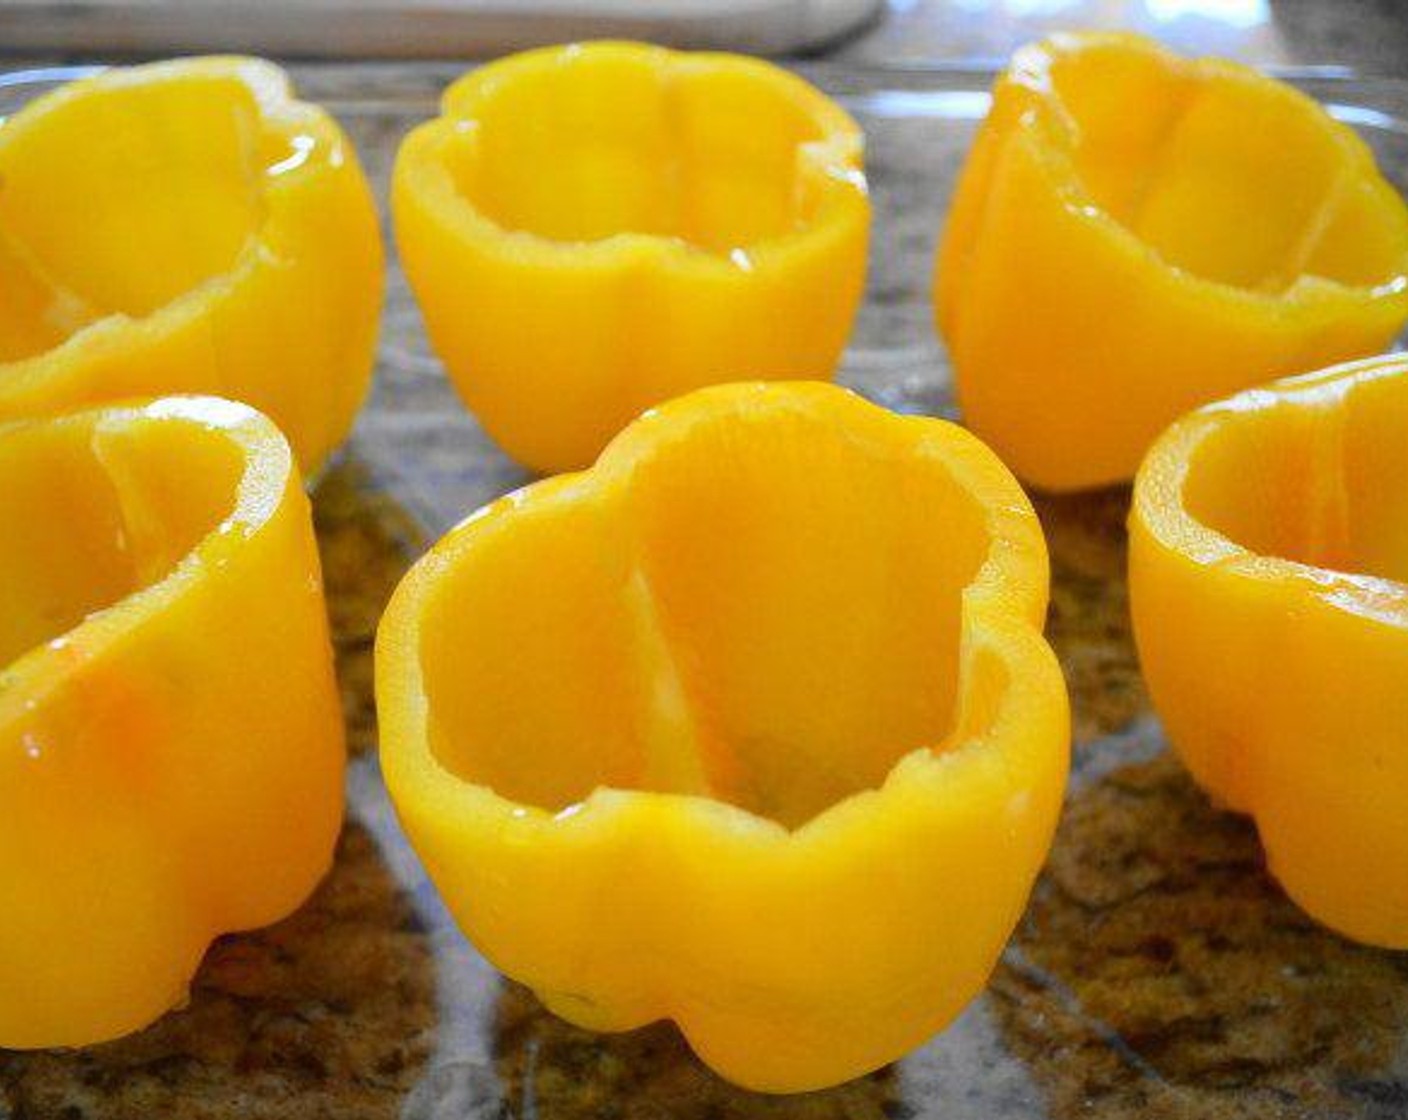 step 2 Prep your ingredients: Thoroughly wash the outside of the Yellow Bell Peppers (6) with cold water. Cut off the very tops and scoop out the seeds and membrane to have a nice, clean vessel for the filling.